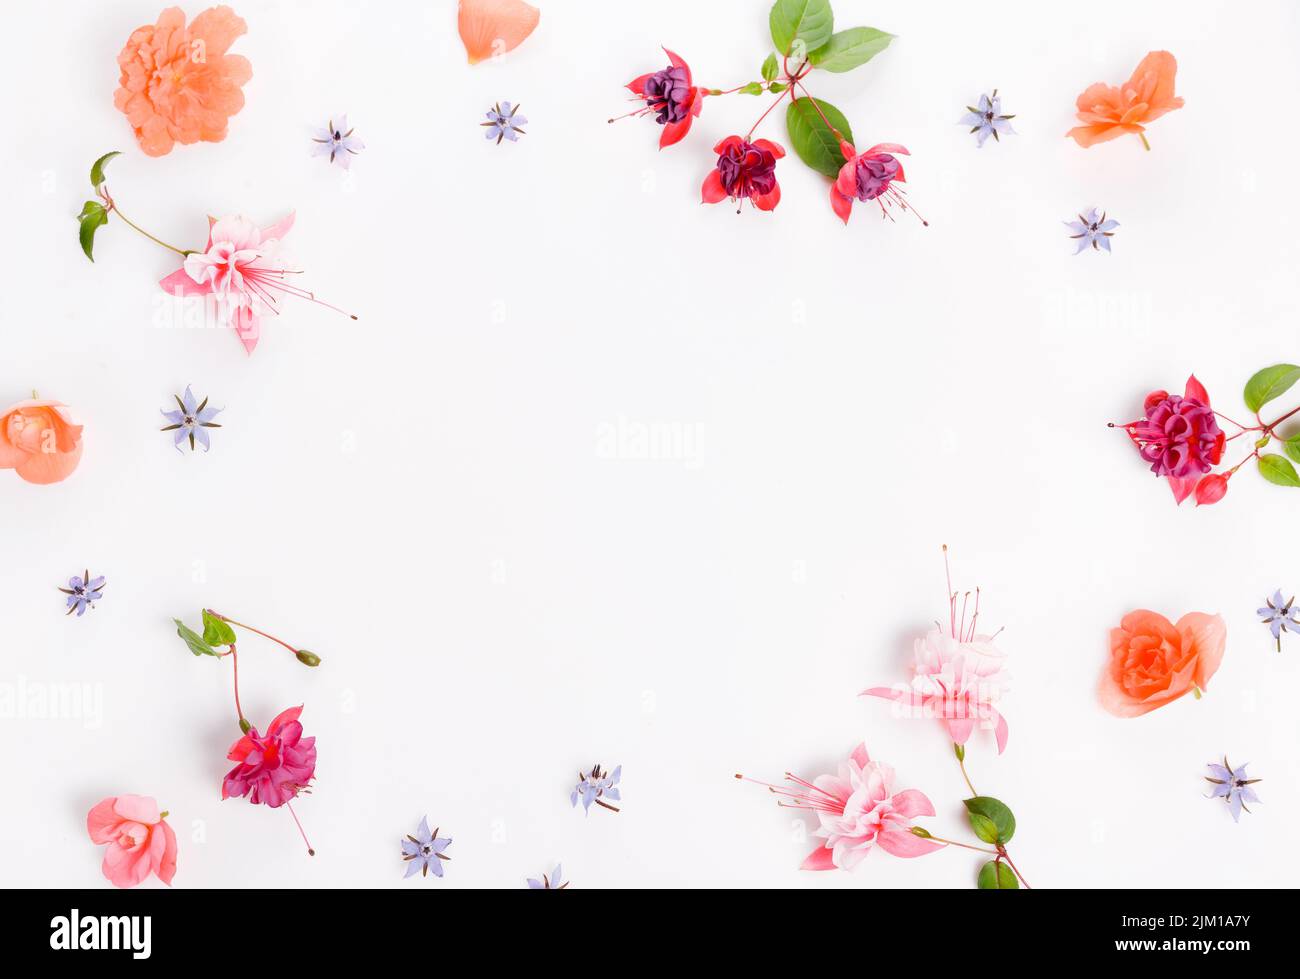 Flat lay holiday set with pink, purple fuchsia flowers on white background, top view Stock Photo